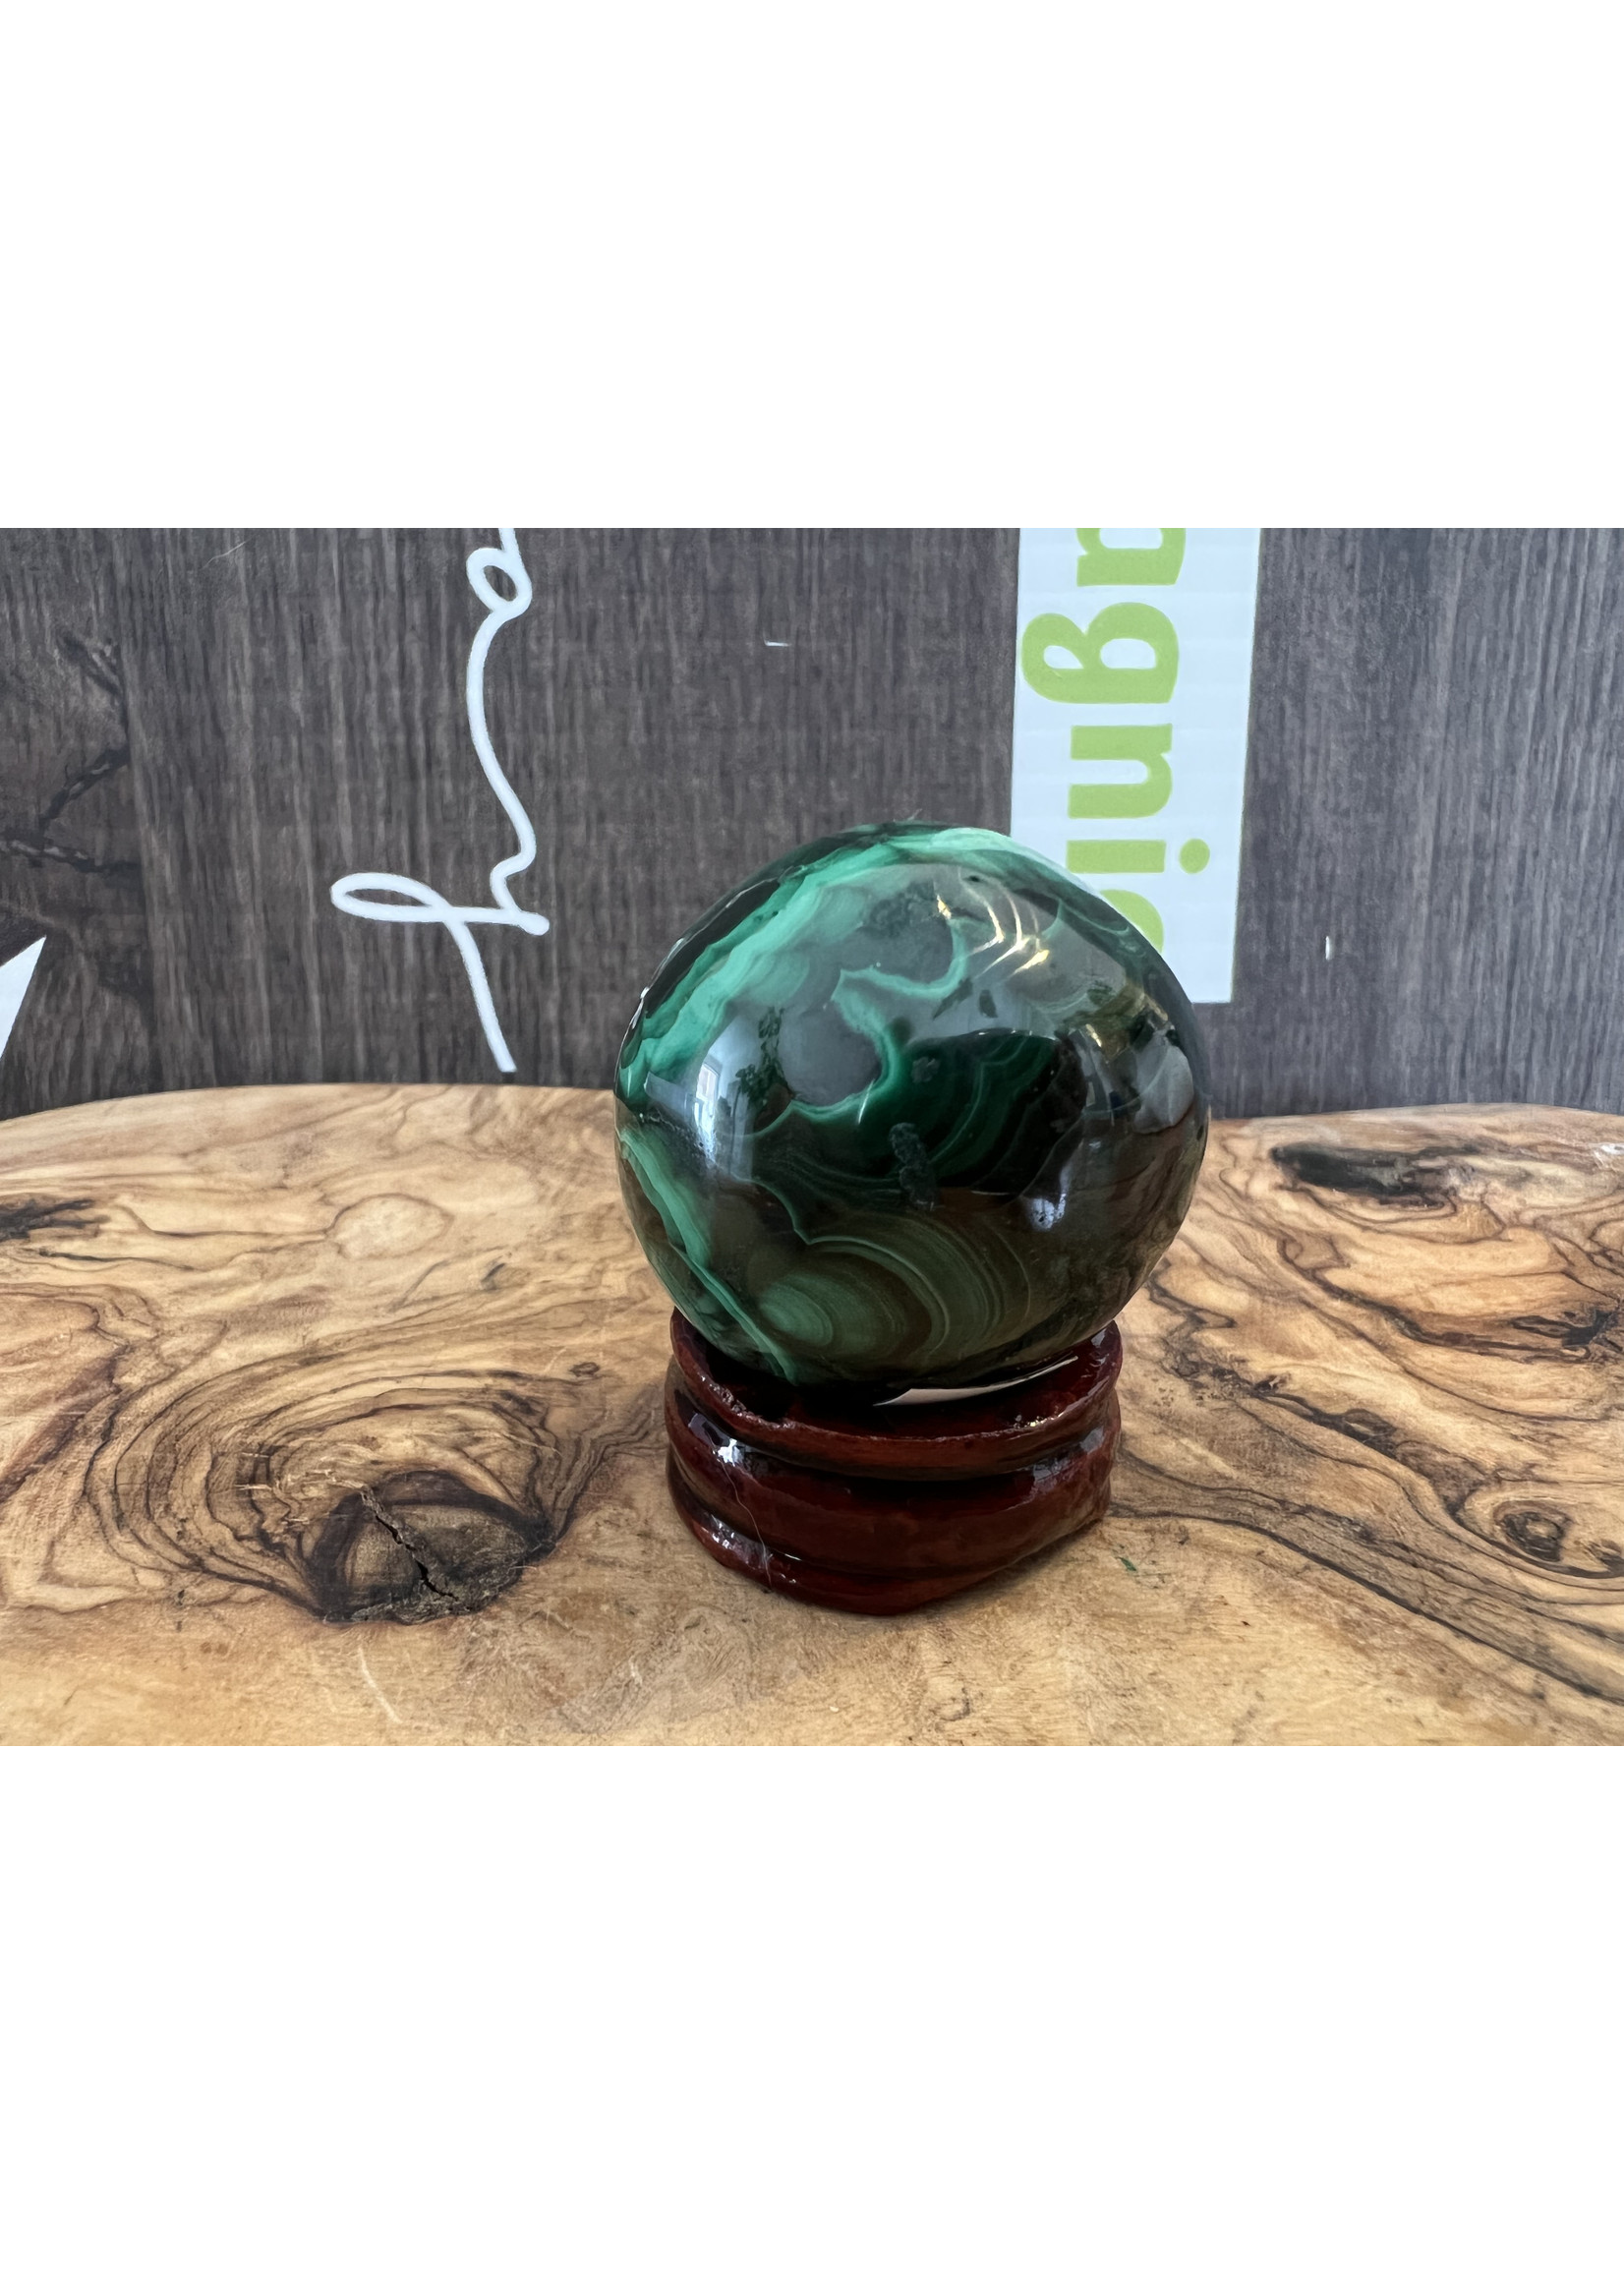 special malachite sphere, it fights against depression by radiating powerful positive waves